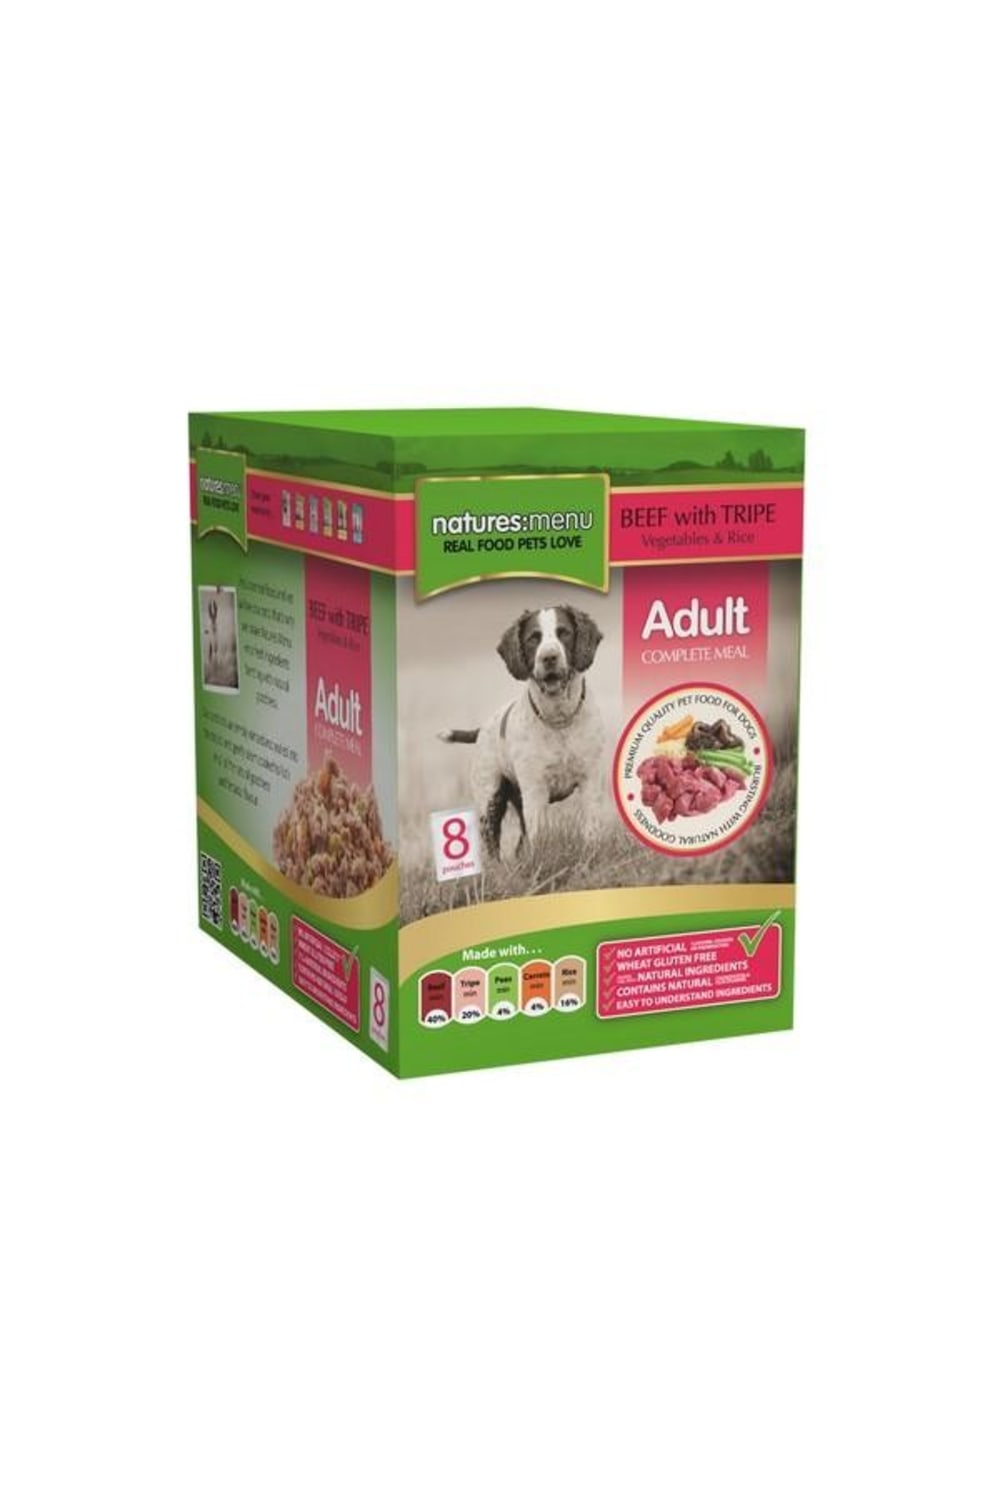 Natures Menu Beef And Tripe Adult Wet Dog Food Pouches (Pack Of 8) (Beef And Tripe) (Pack Of 8)